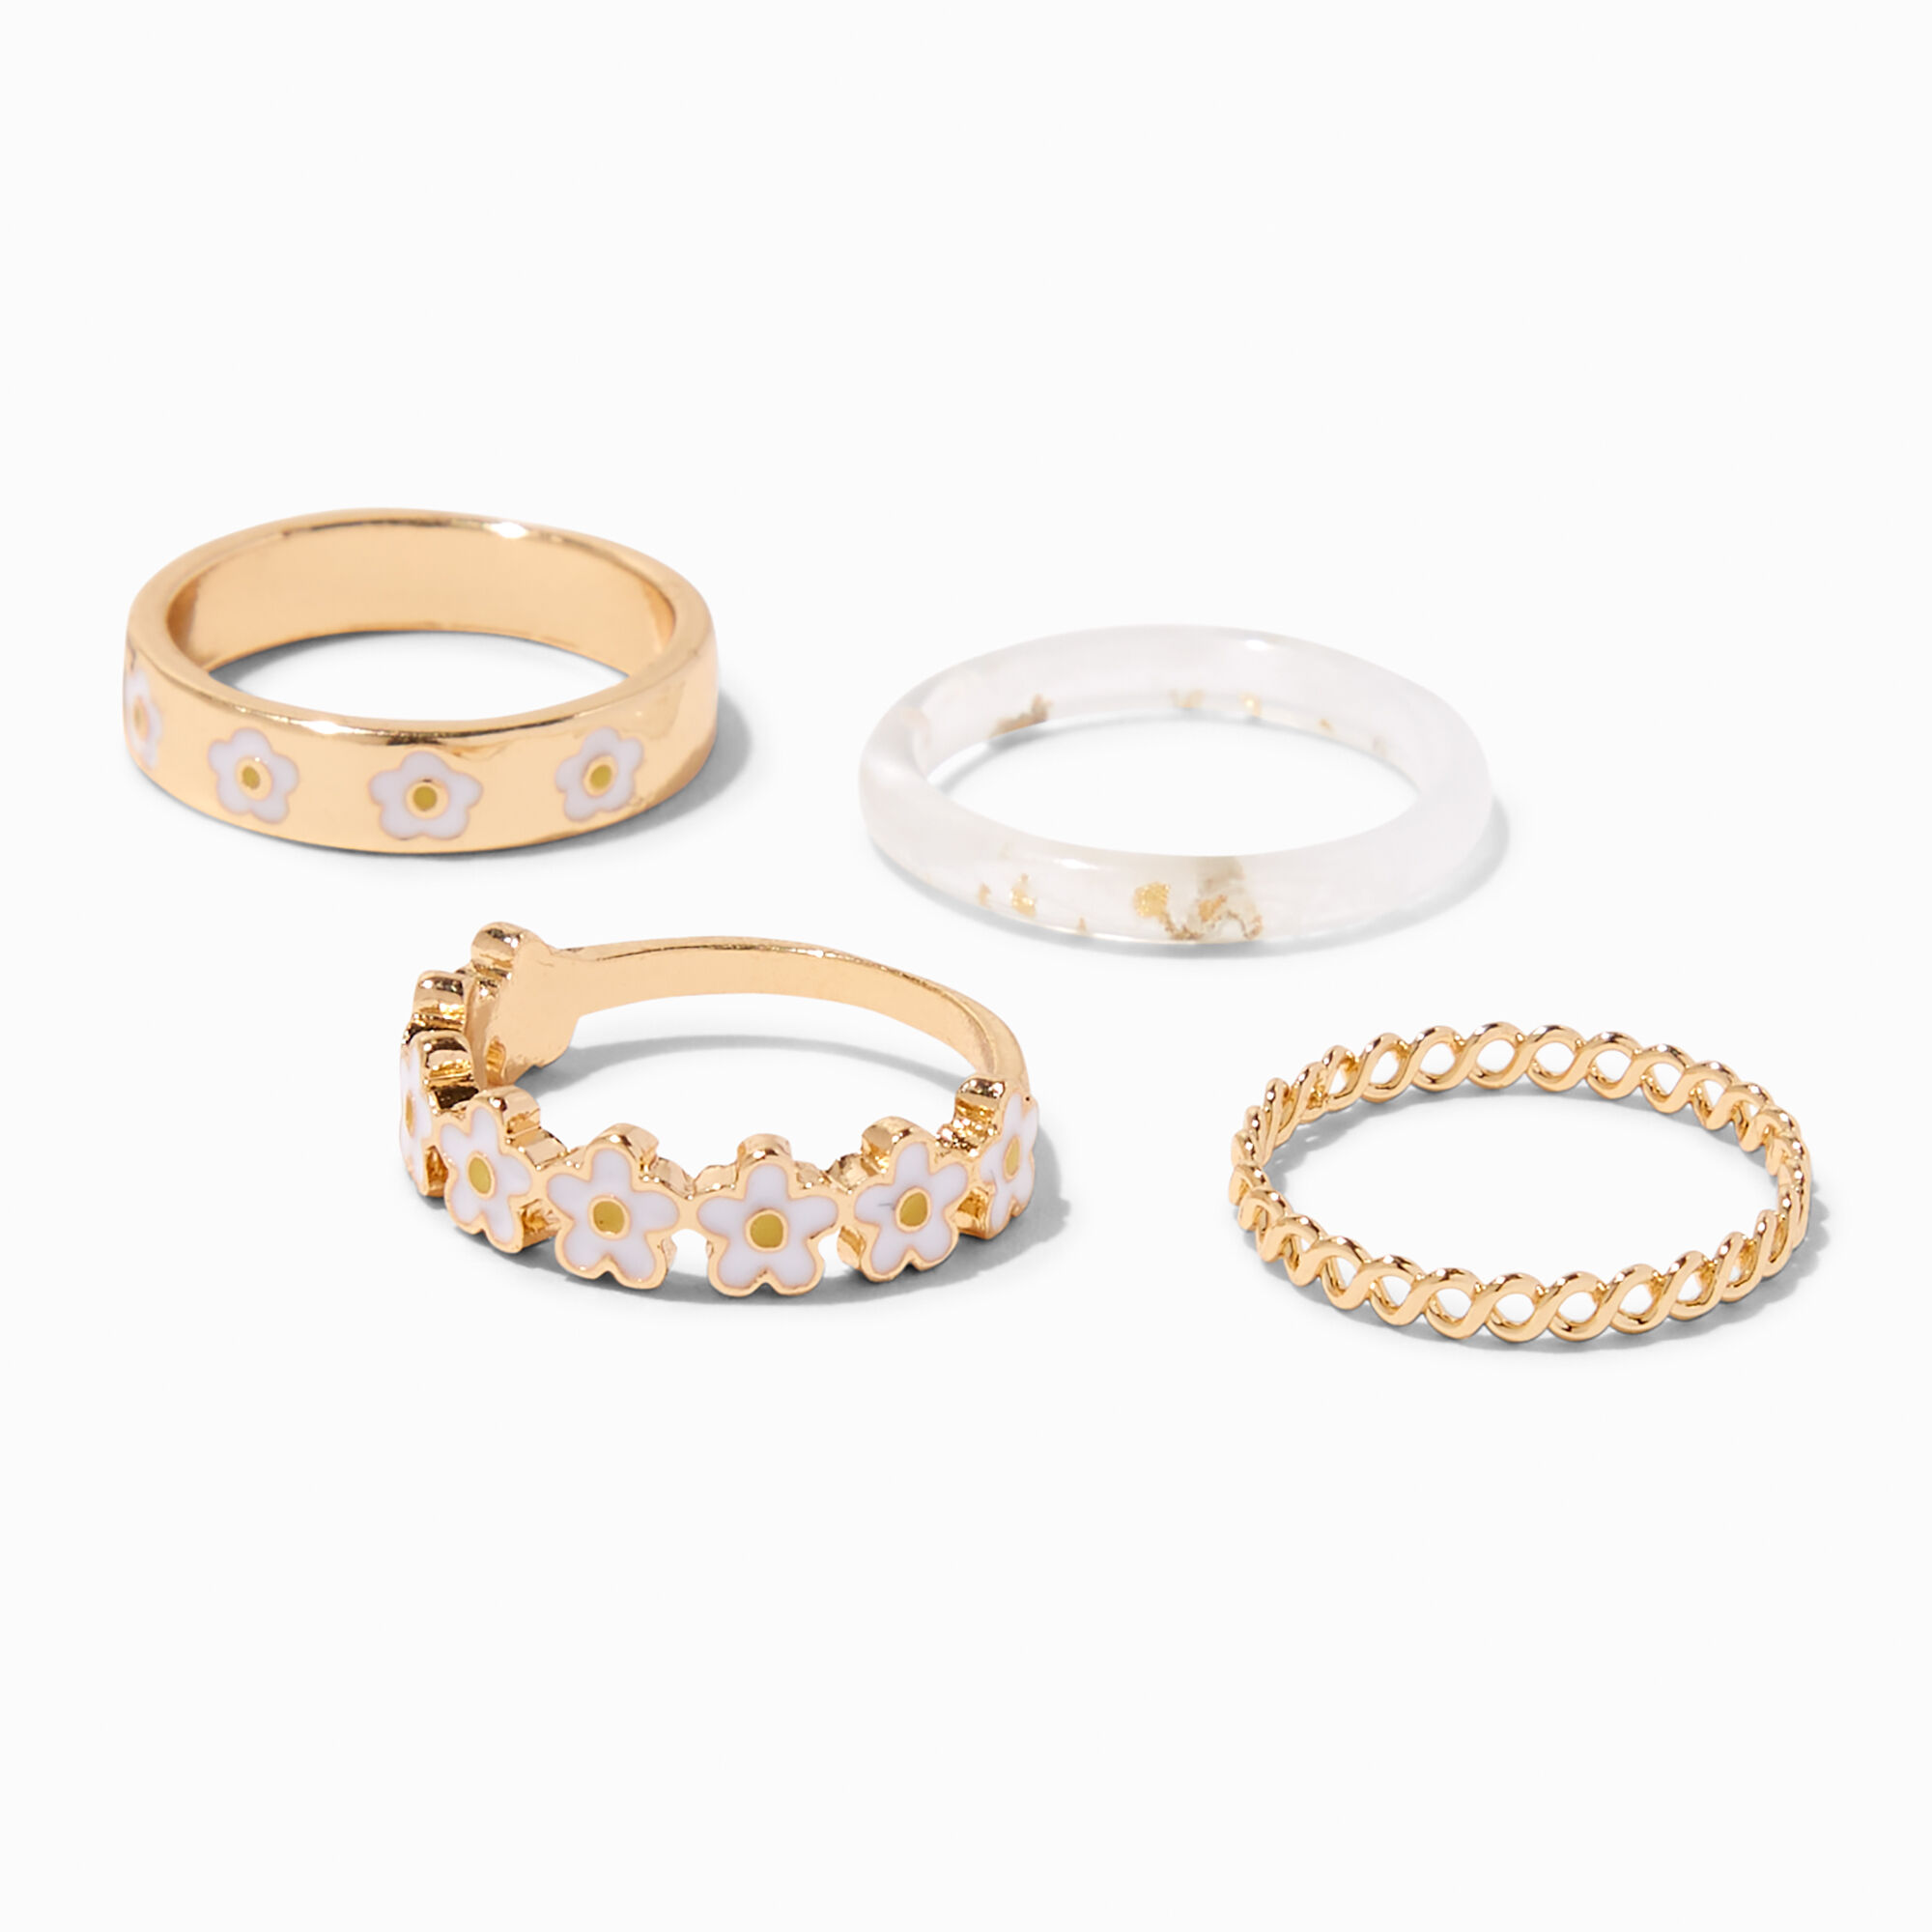 View Claires Daisy Enamel Gold Woven Rings Set 4 Pack White information